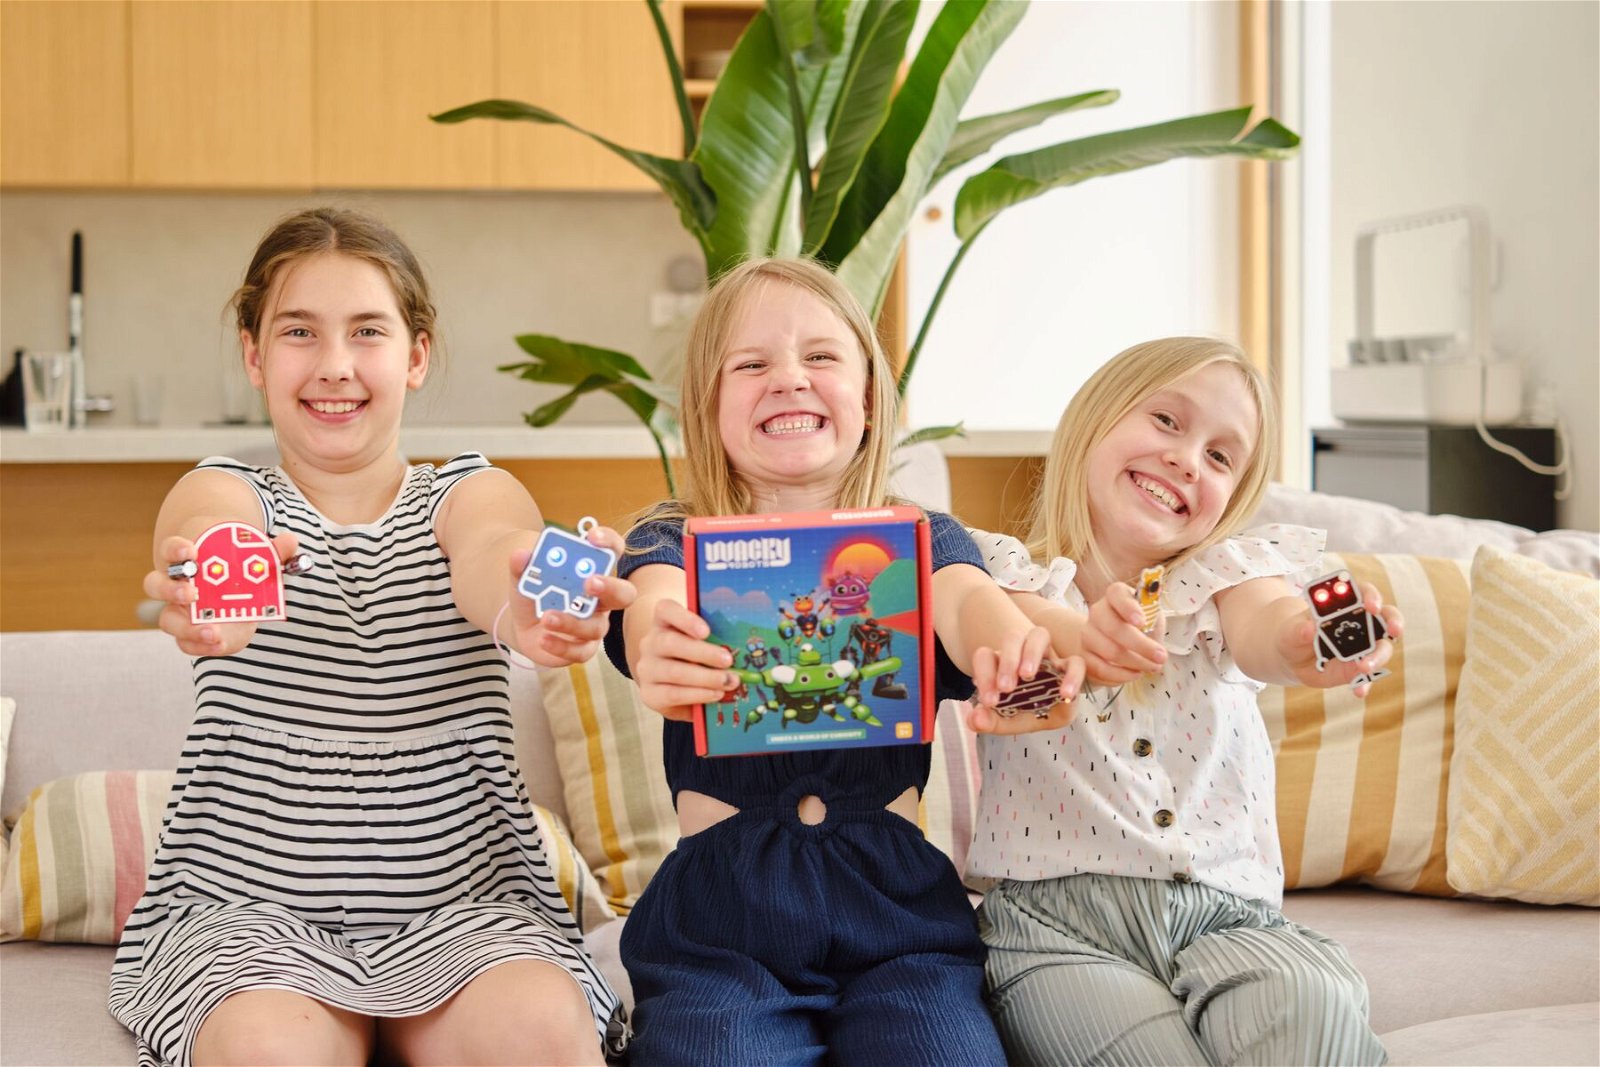 Three children sit smiling on the sofa and hold the Dusty the Wacky Robot educational set.